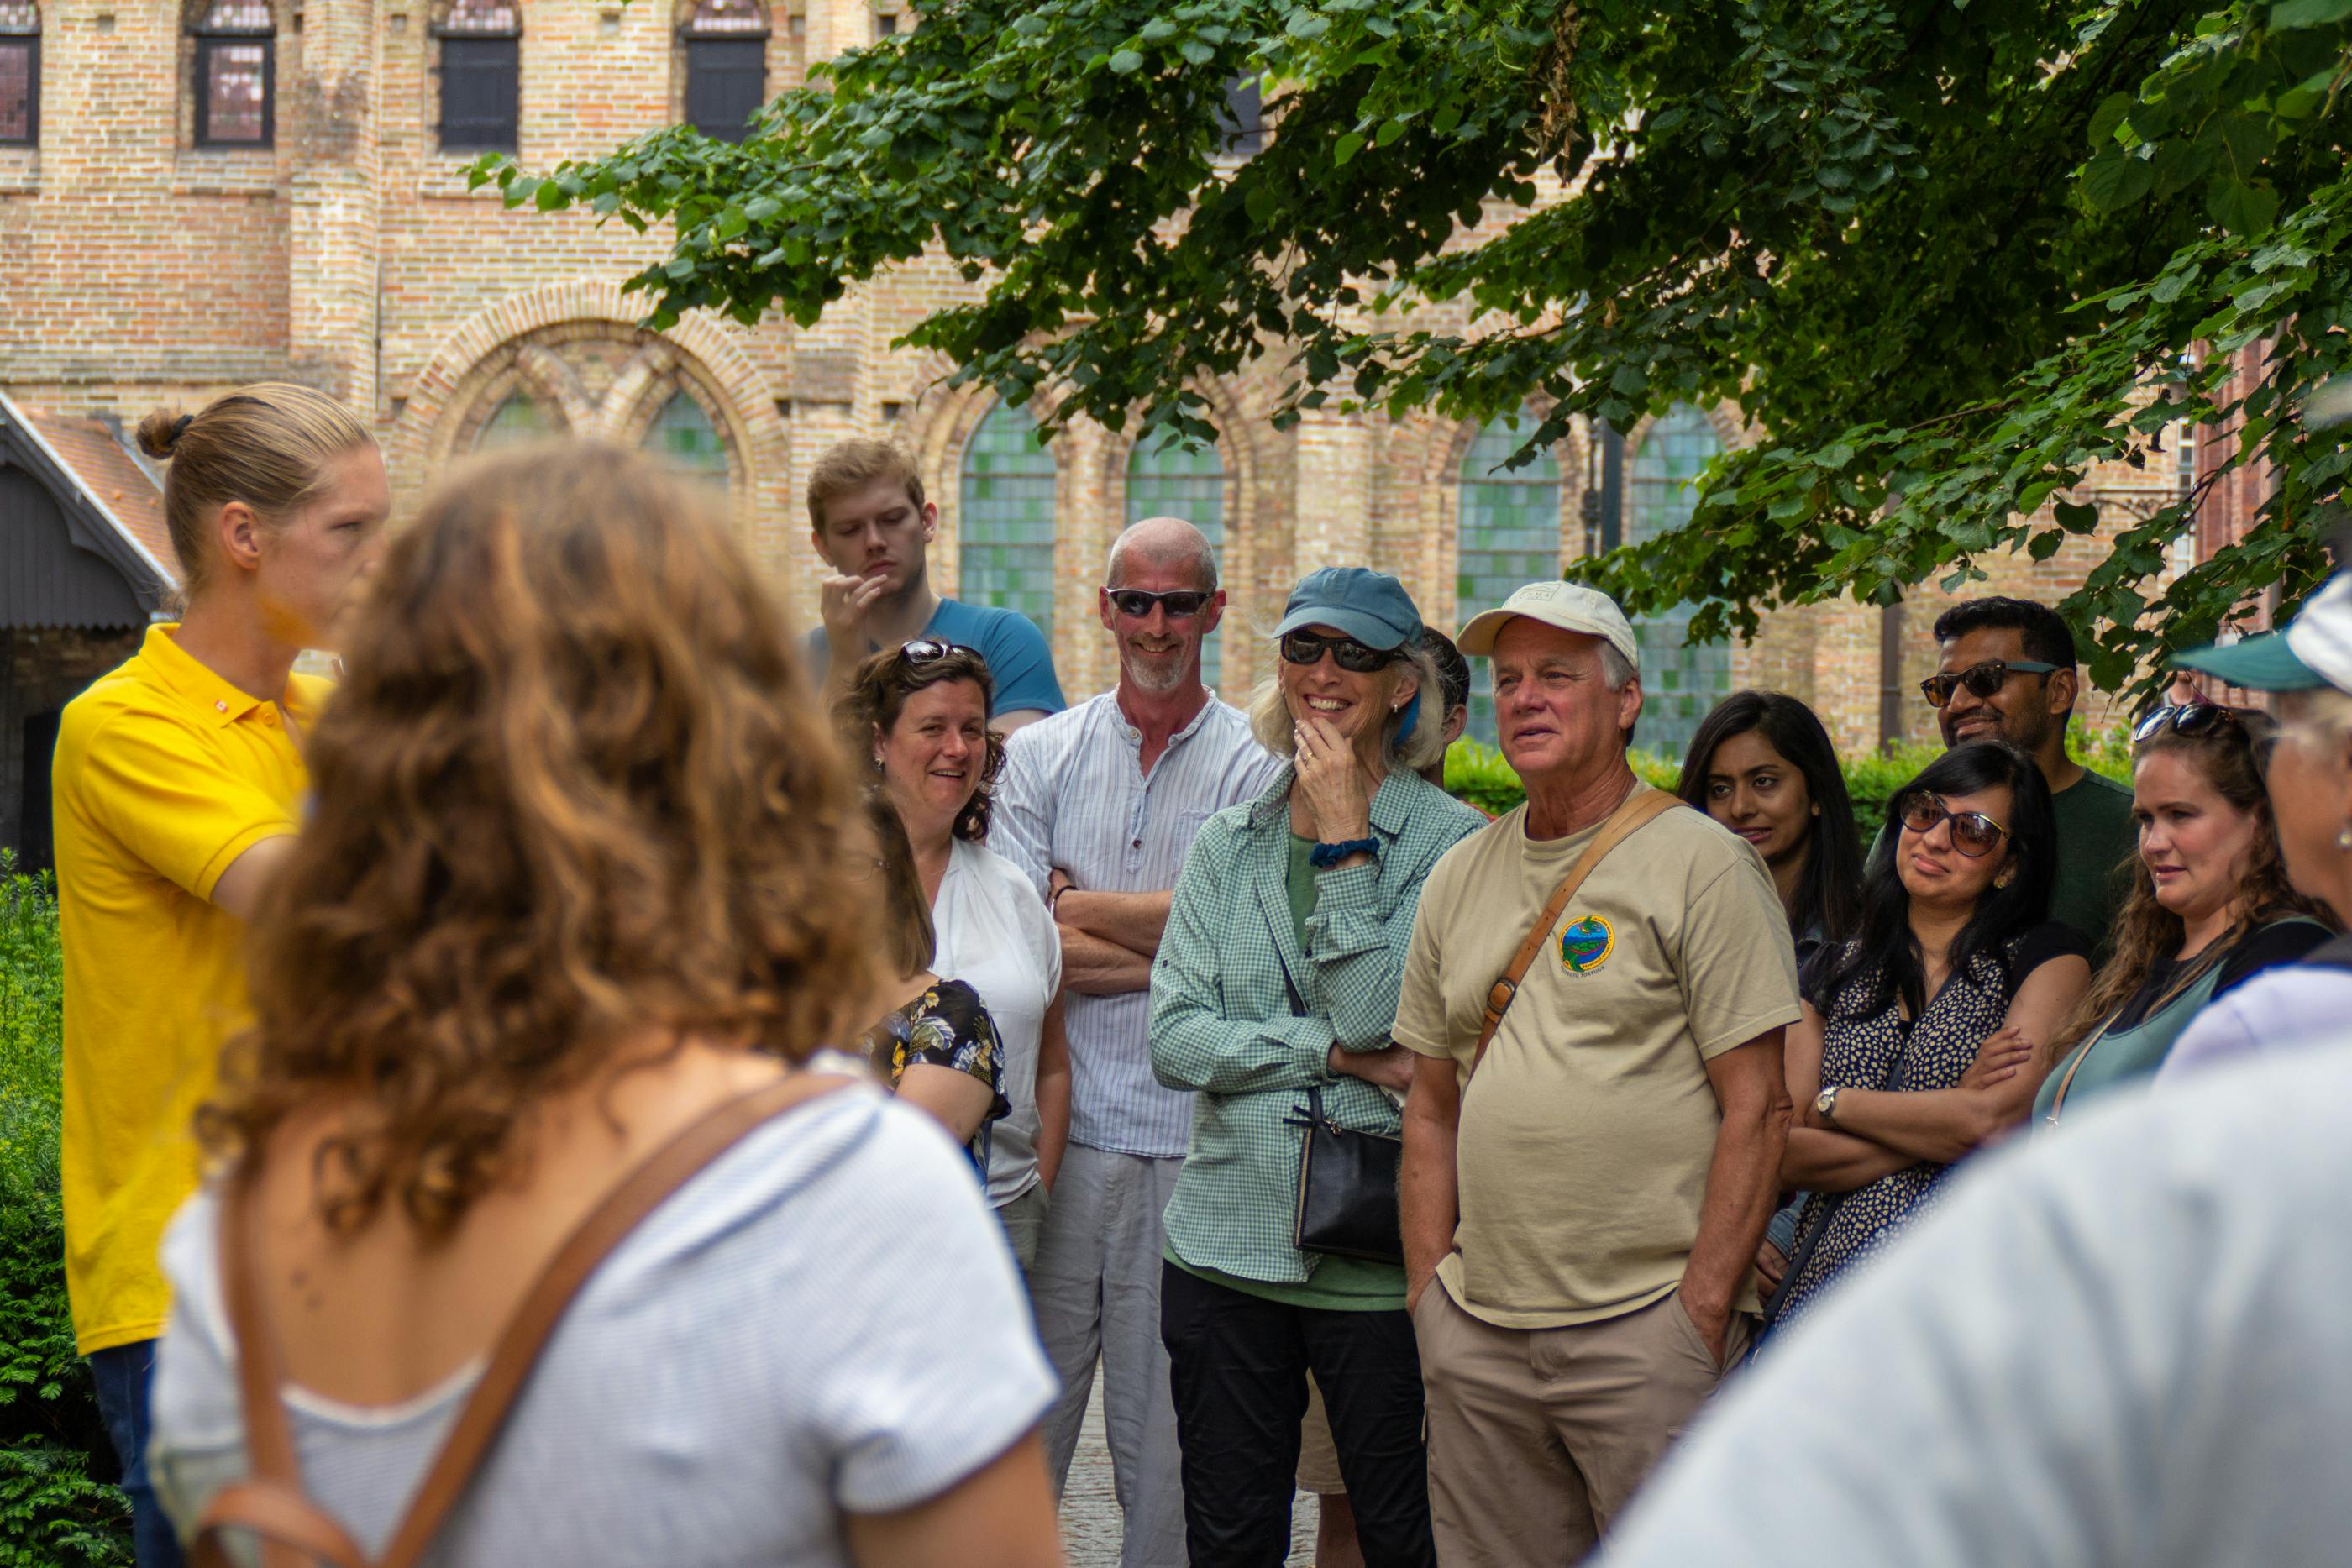 Book this pay what you want guided walking tour of Bruges and learn